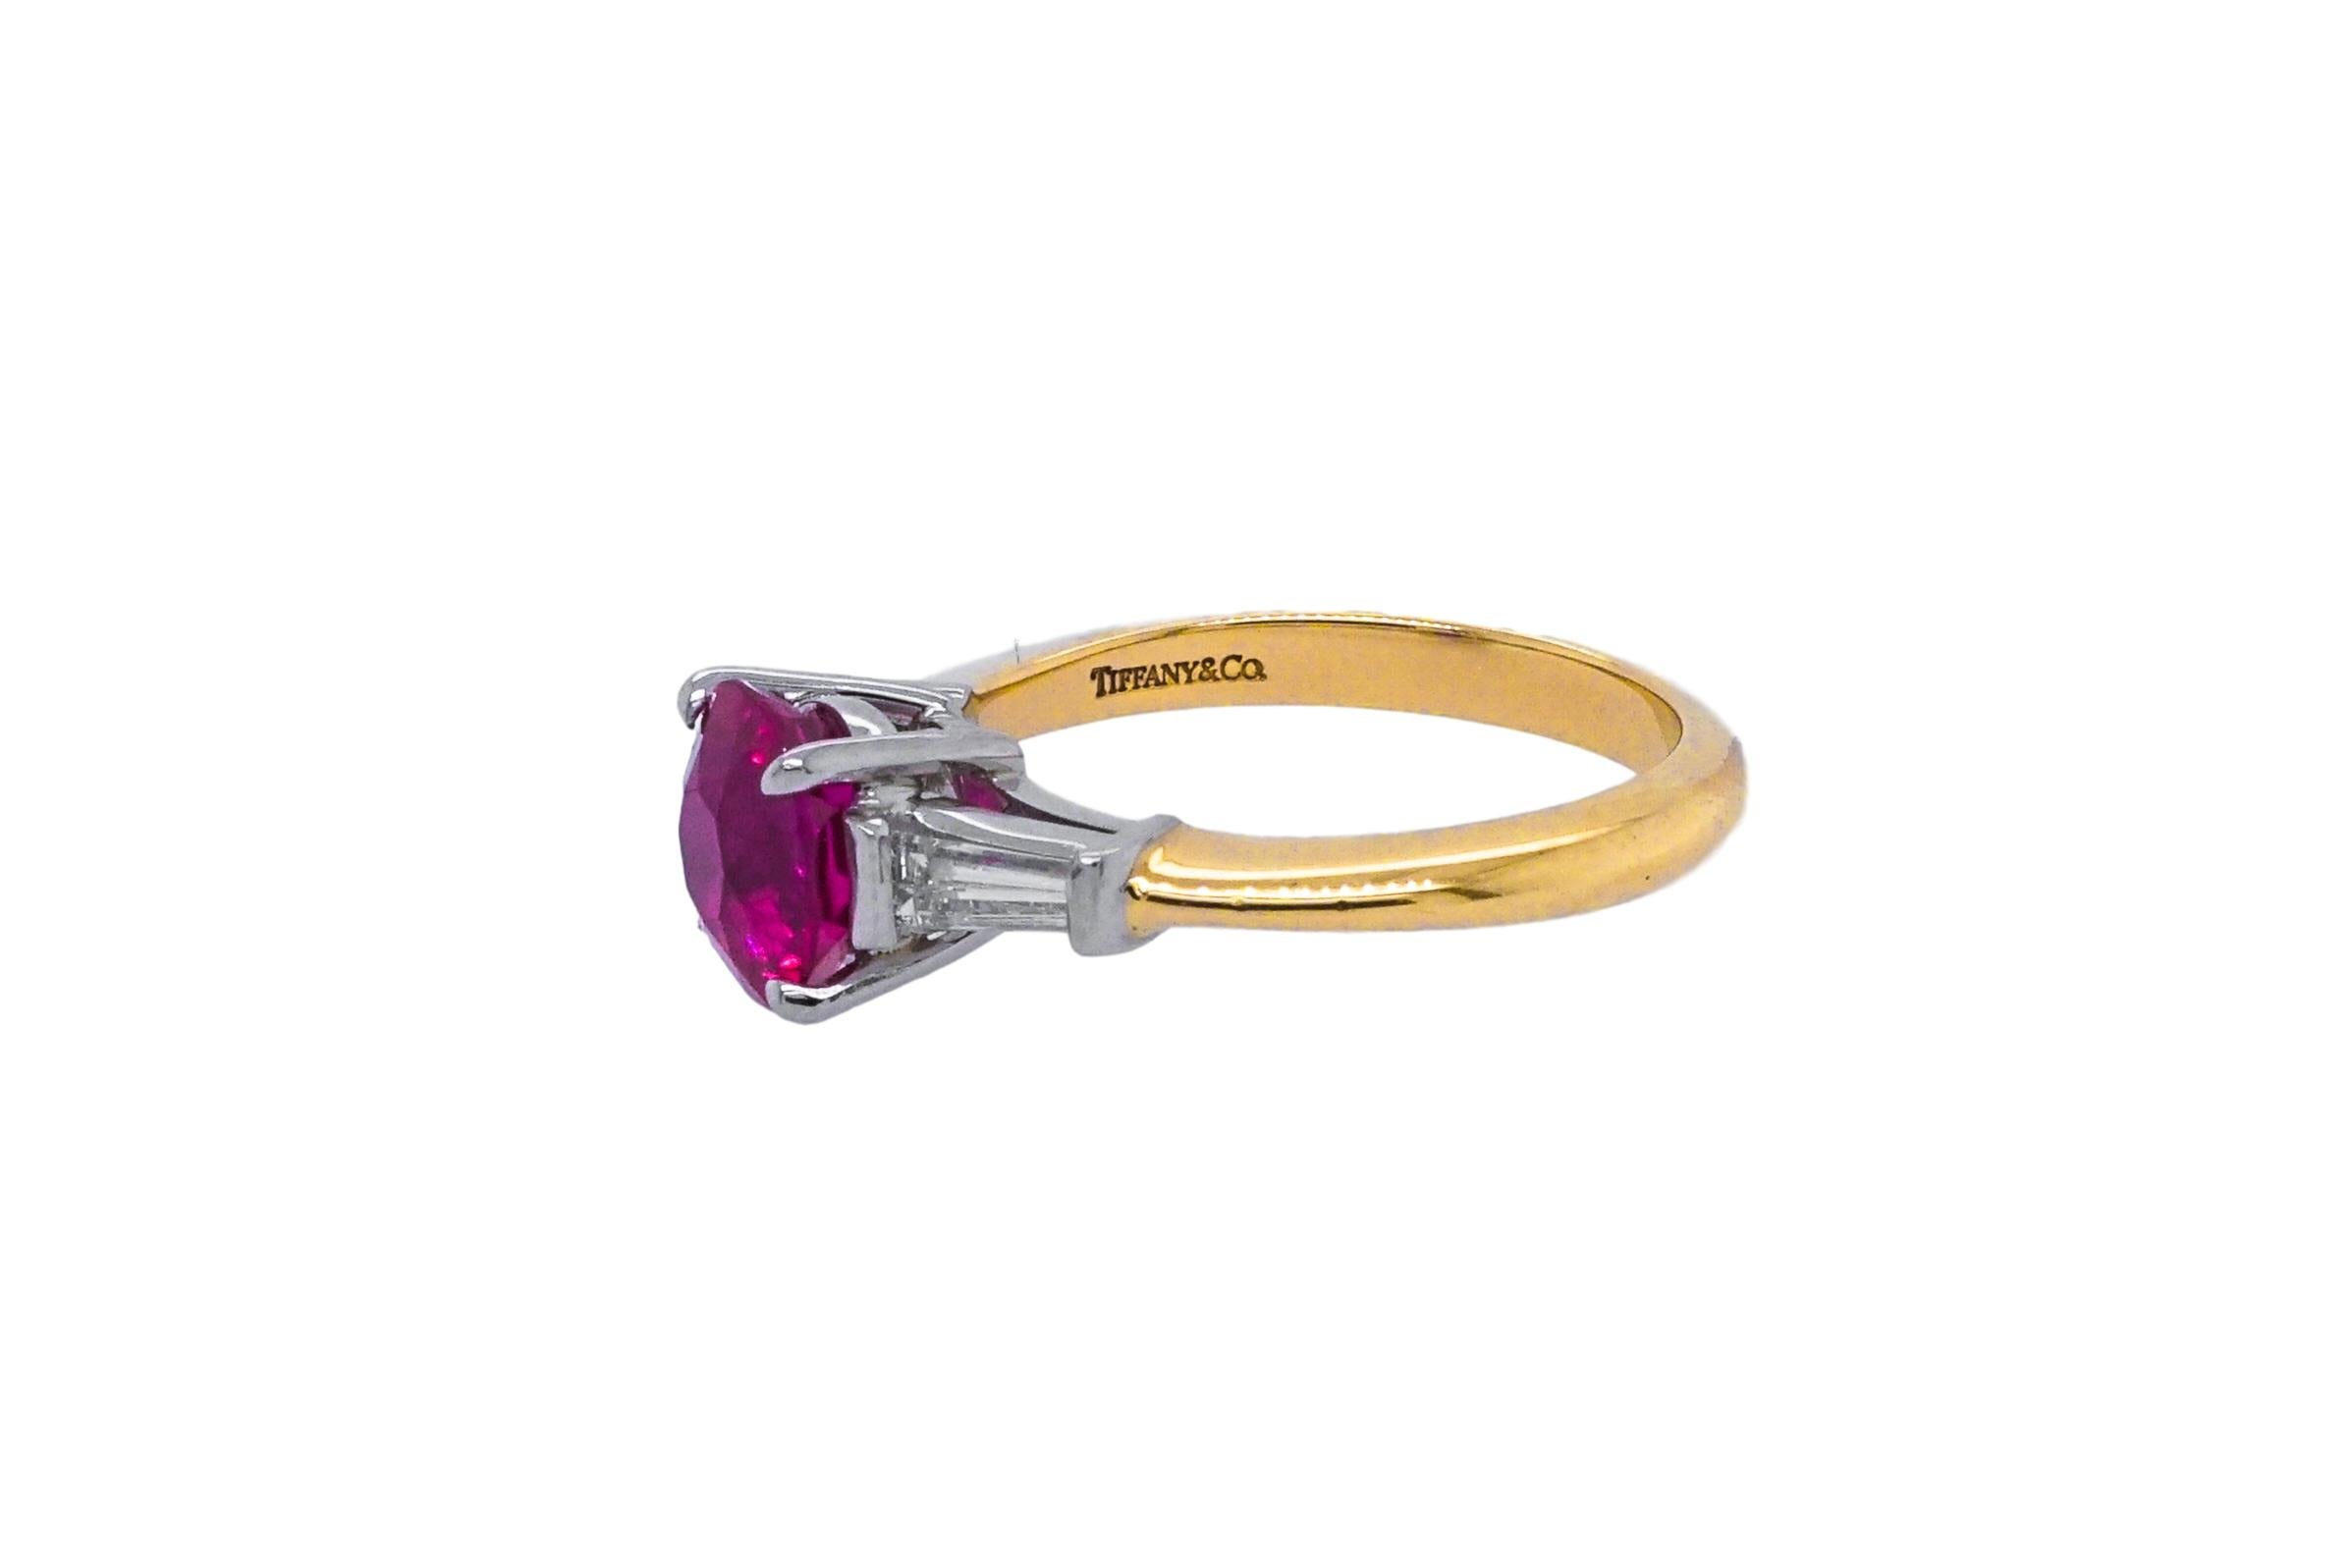 This 18kt Tiffany & Co Ring., features a single centering oval ruby approximating at 1.77 cts., this ruby is flanked by 2 tapered baguette diamonds, signed Tiffany & Co. Size 6.